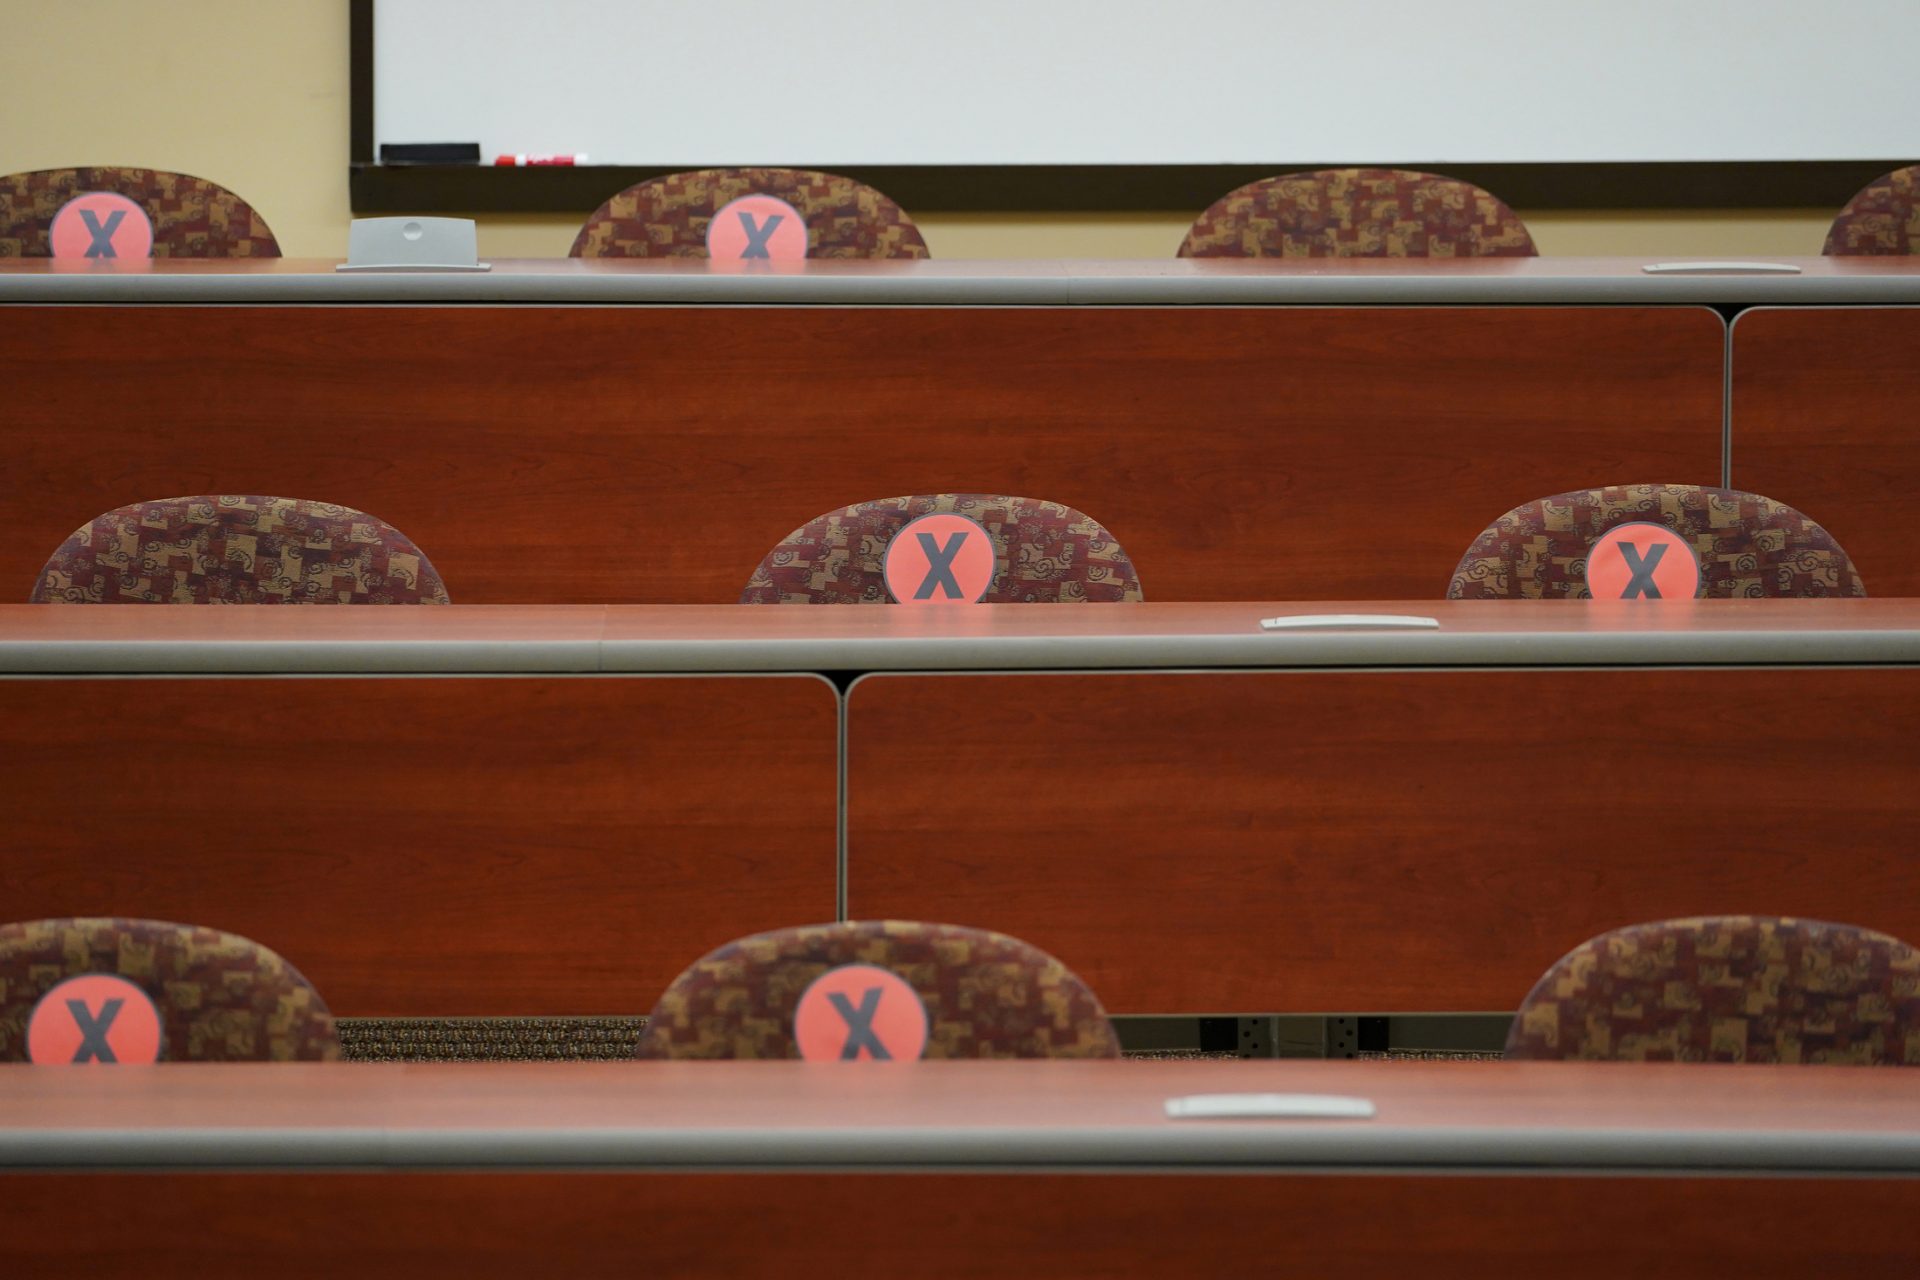 Signage marks where students can sit in a lecture hall at the Academic Forum at Kutztown University in Kutztown.